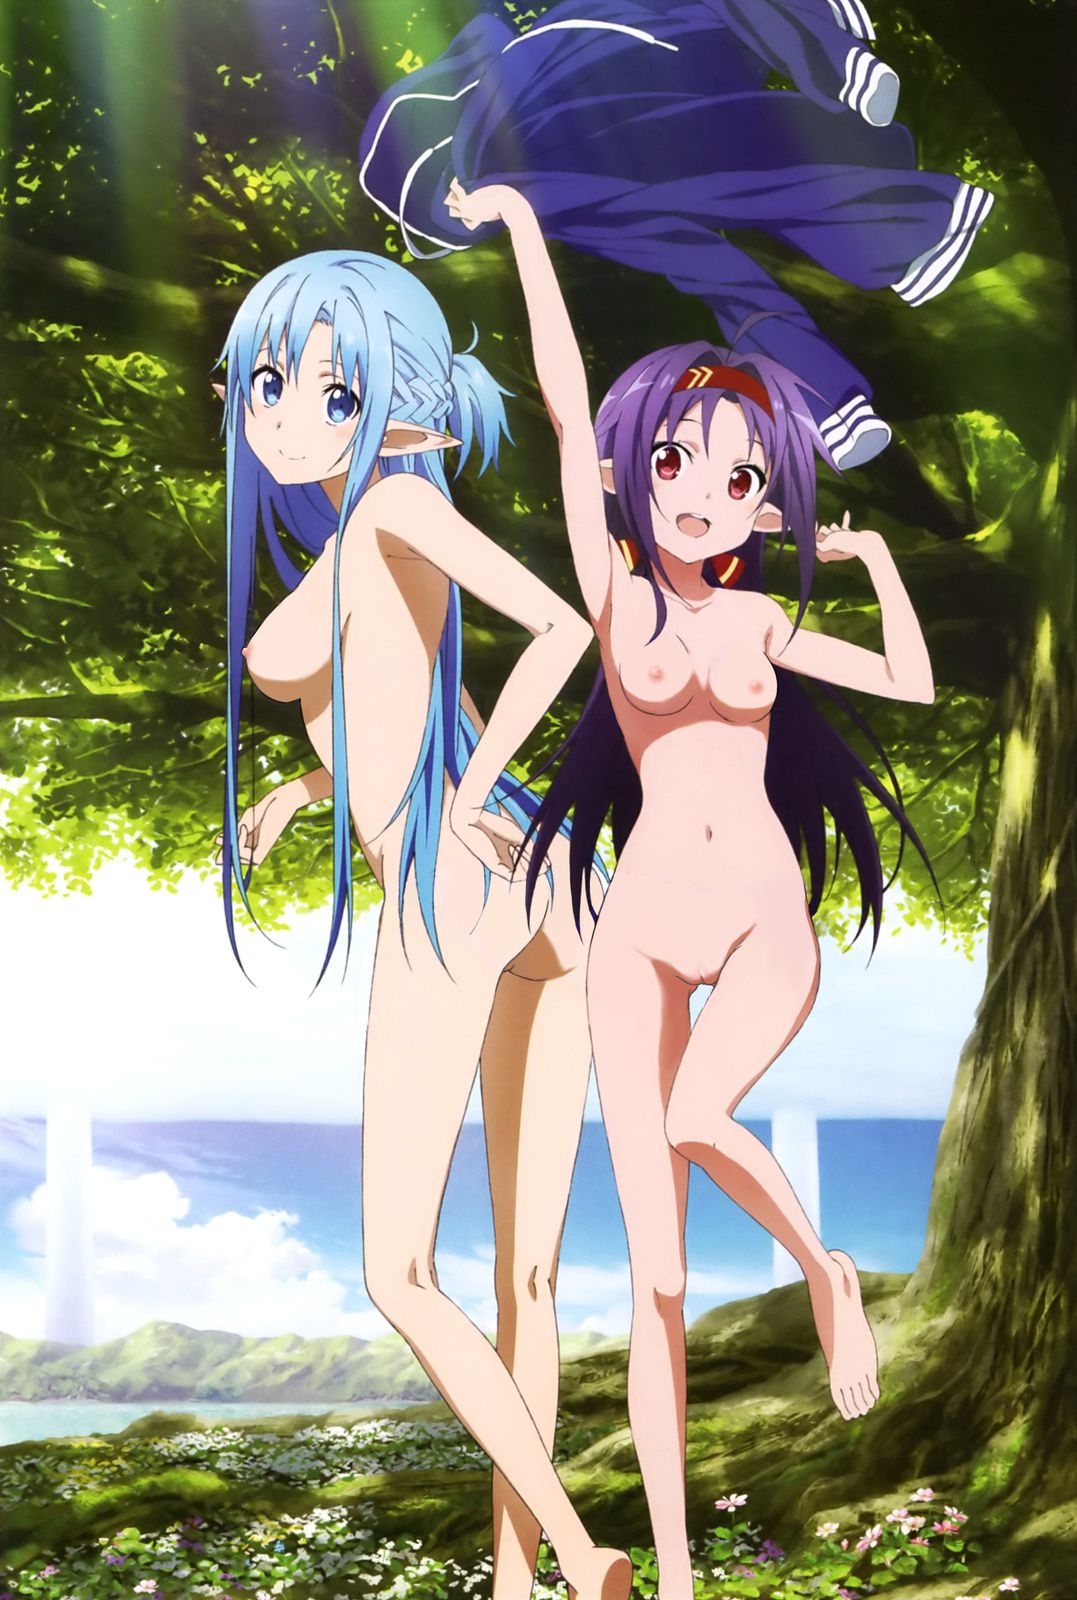 【Secondary Erotic】 Sword Art Online Stripped Coraello images of heroines appearing are here 5